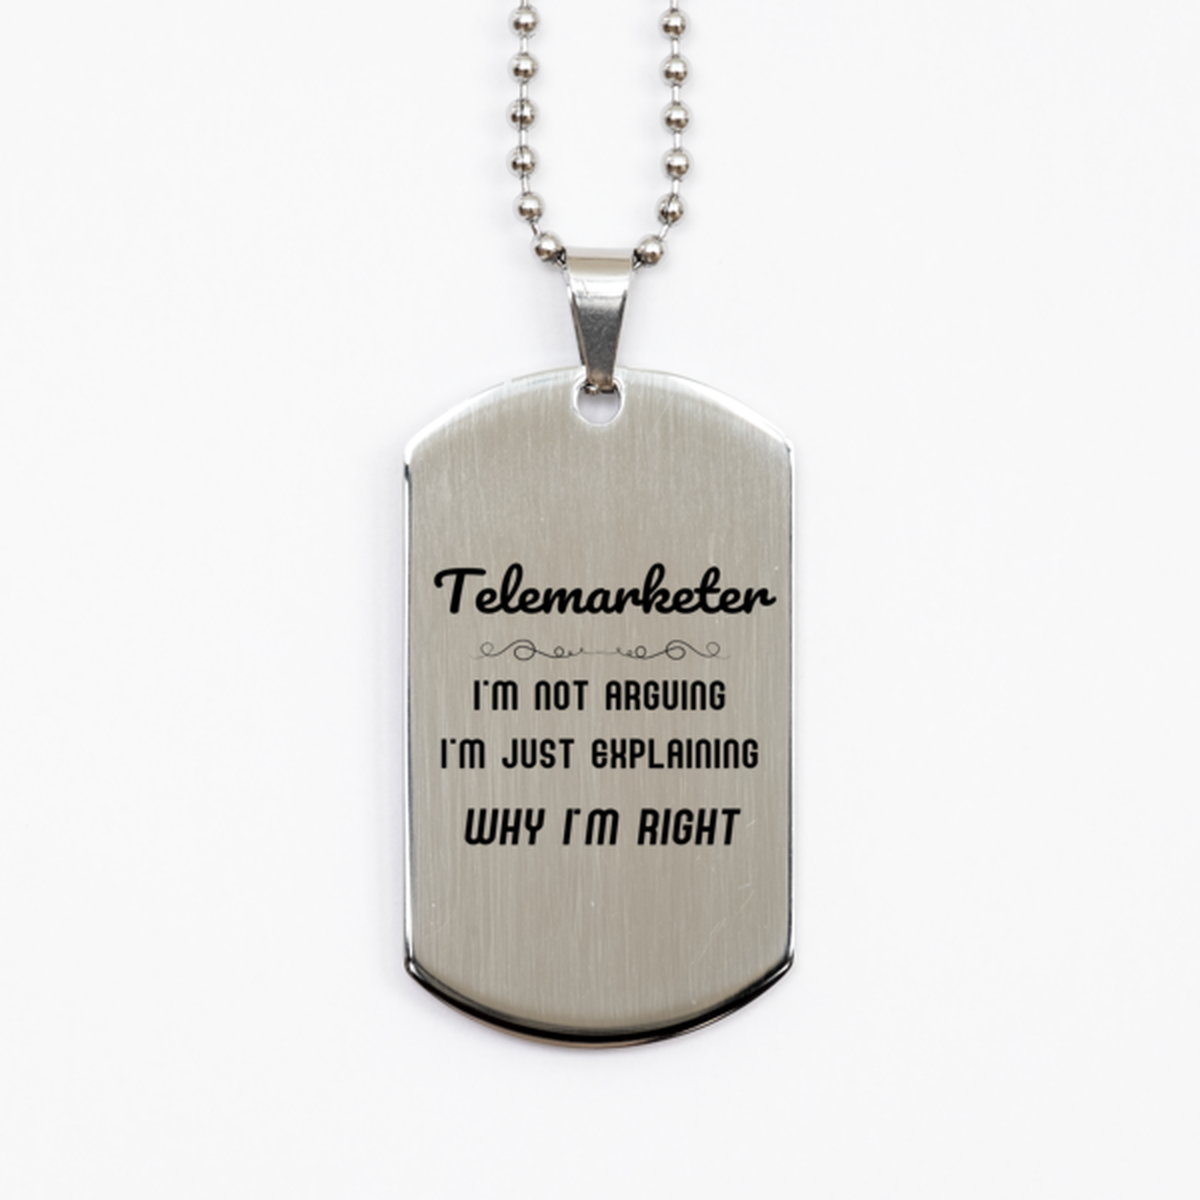 Telemarketer I'm not Arguing. I'm Just Explaining Why I'm RIGHT Silver Dog Tag, Funny Saying Quote Telemarketer Gifts For Telemarketer Graduation Birthday Christmas Gifts for Men Women Coworker